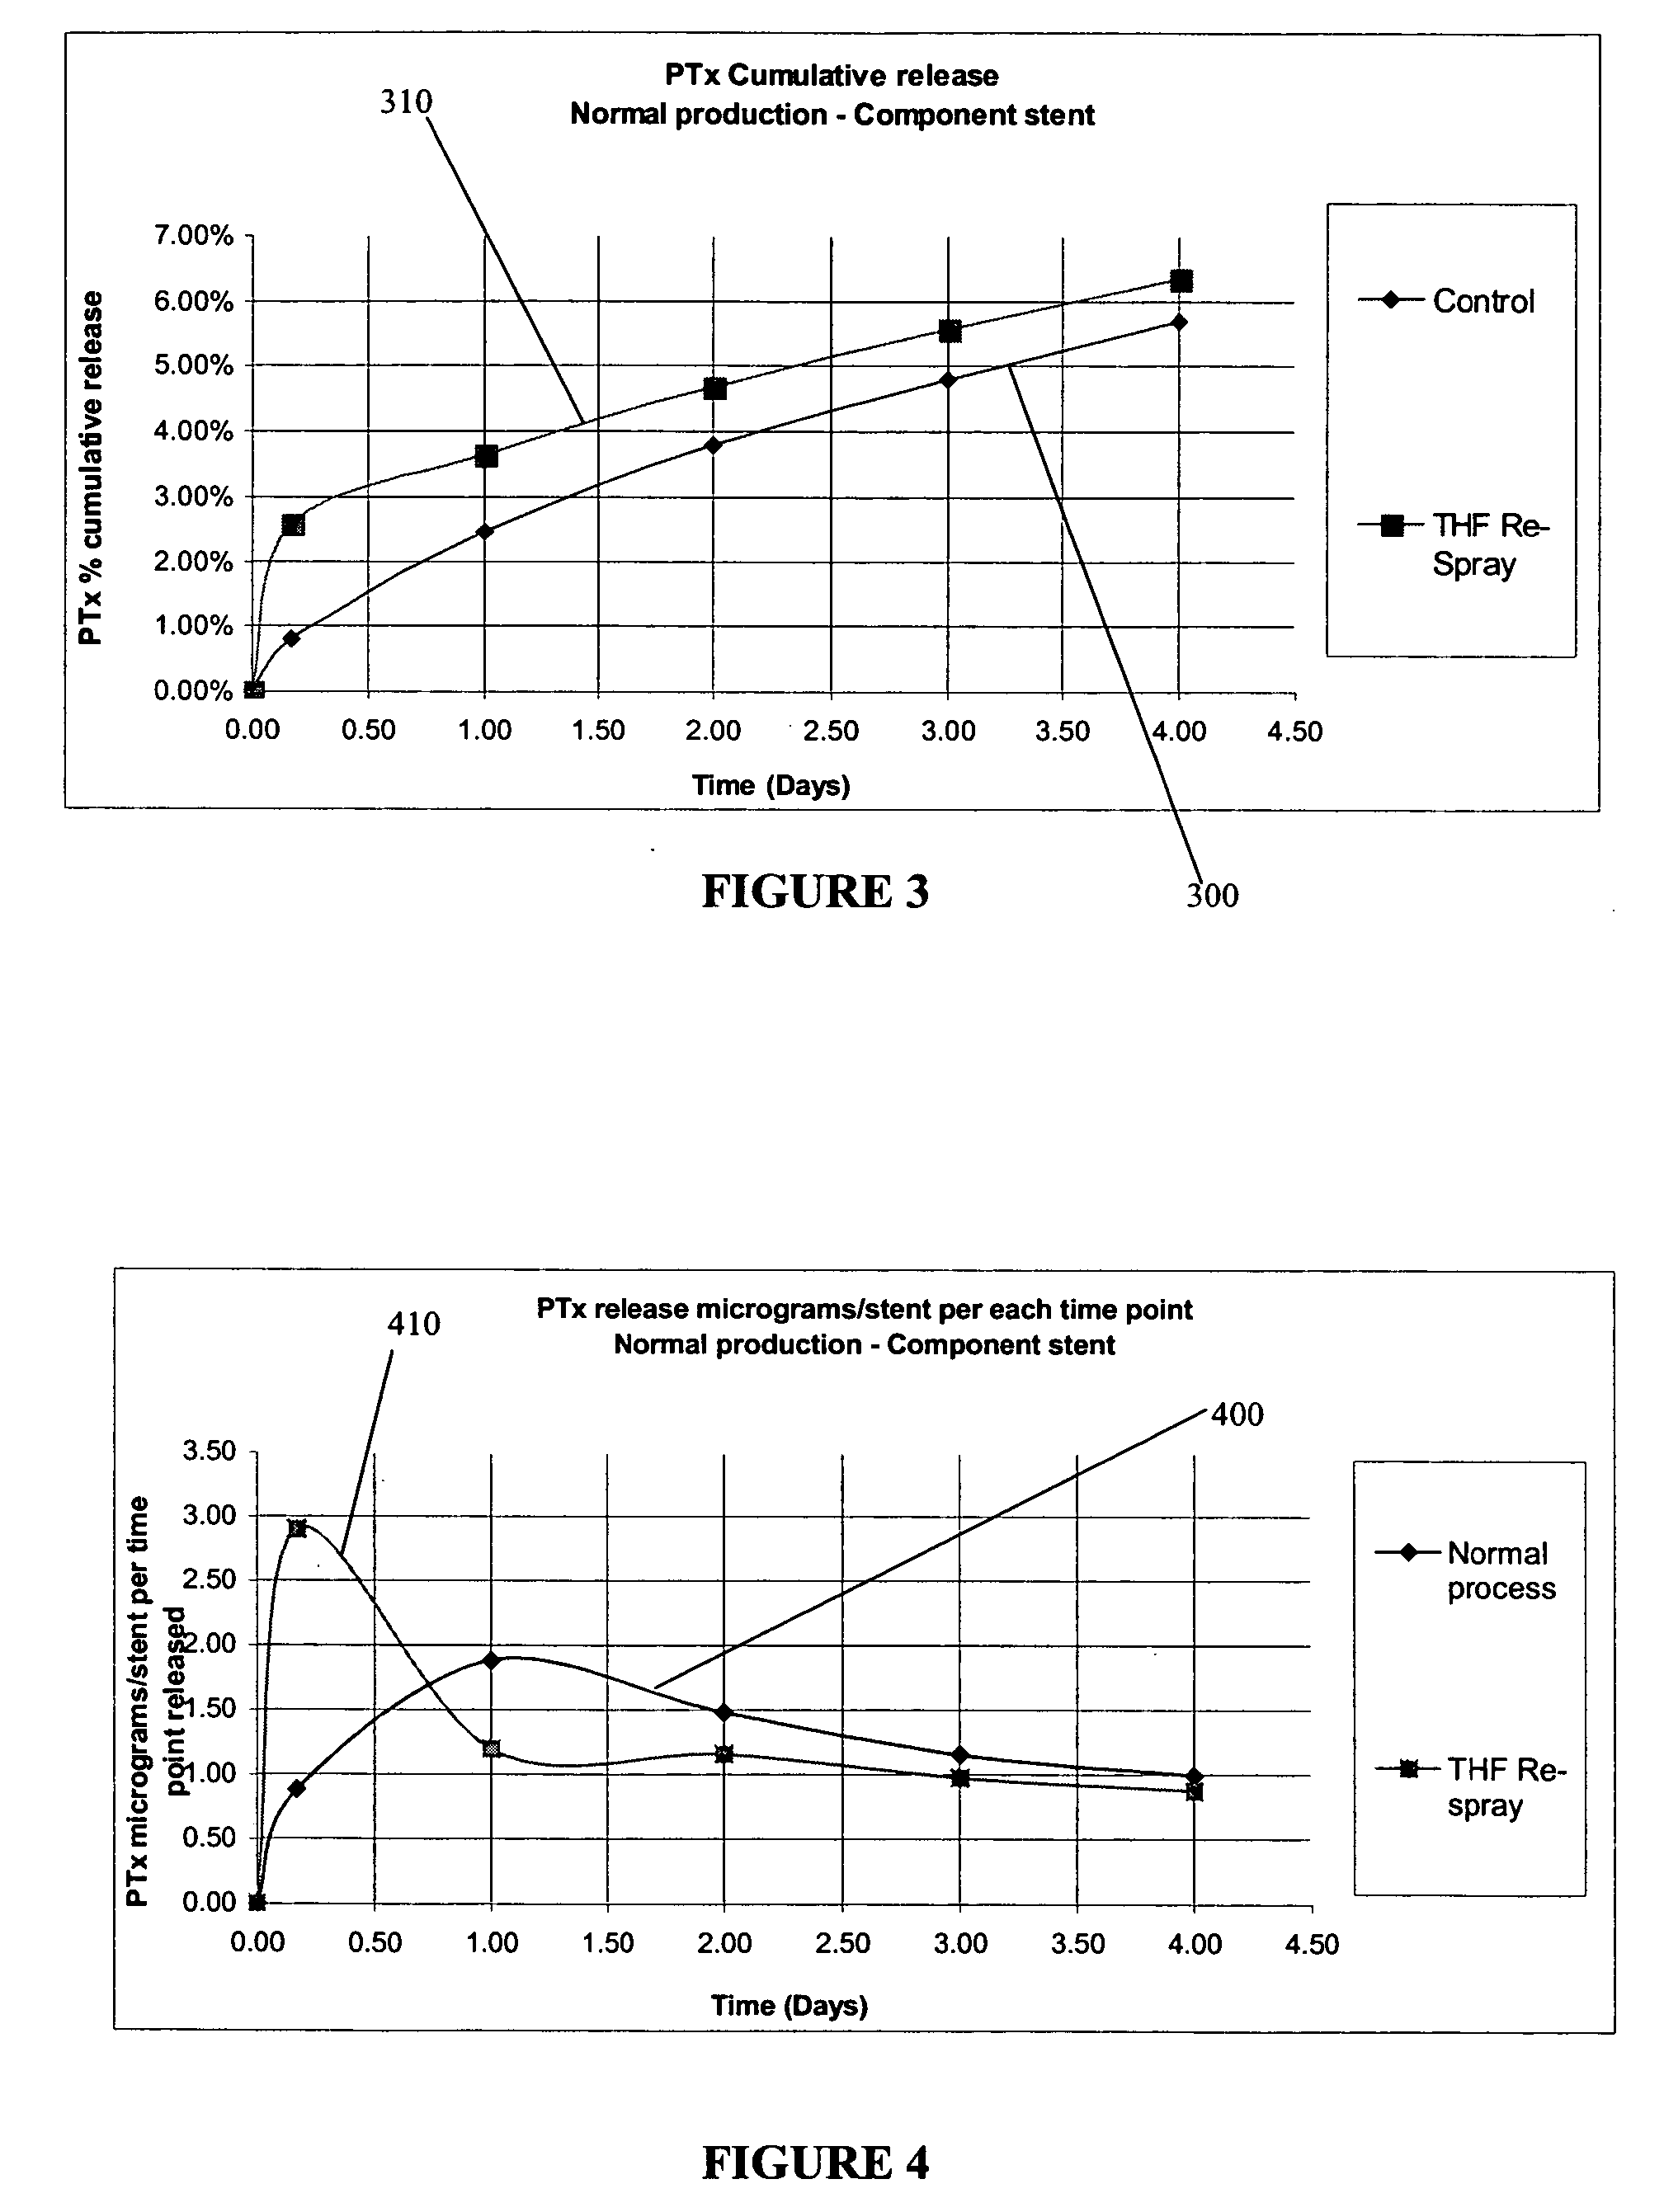 Method of improving the quality and performance of a coating on a coated medical device using a solvent to reflow the coating